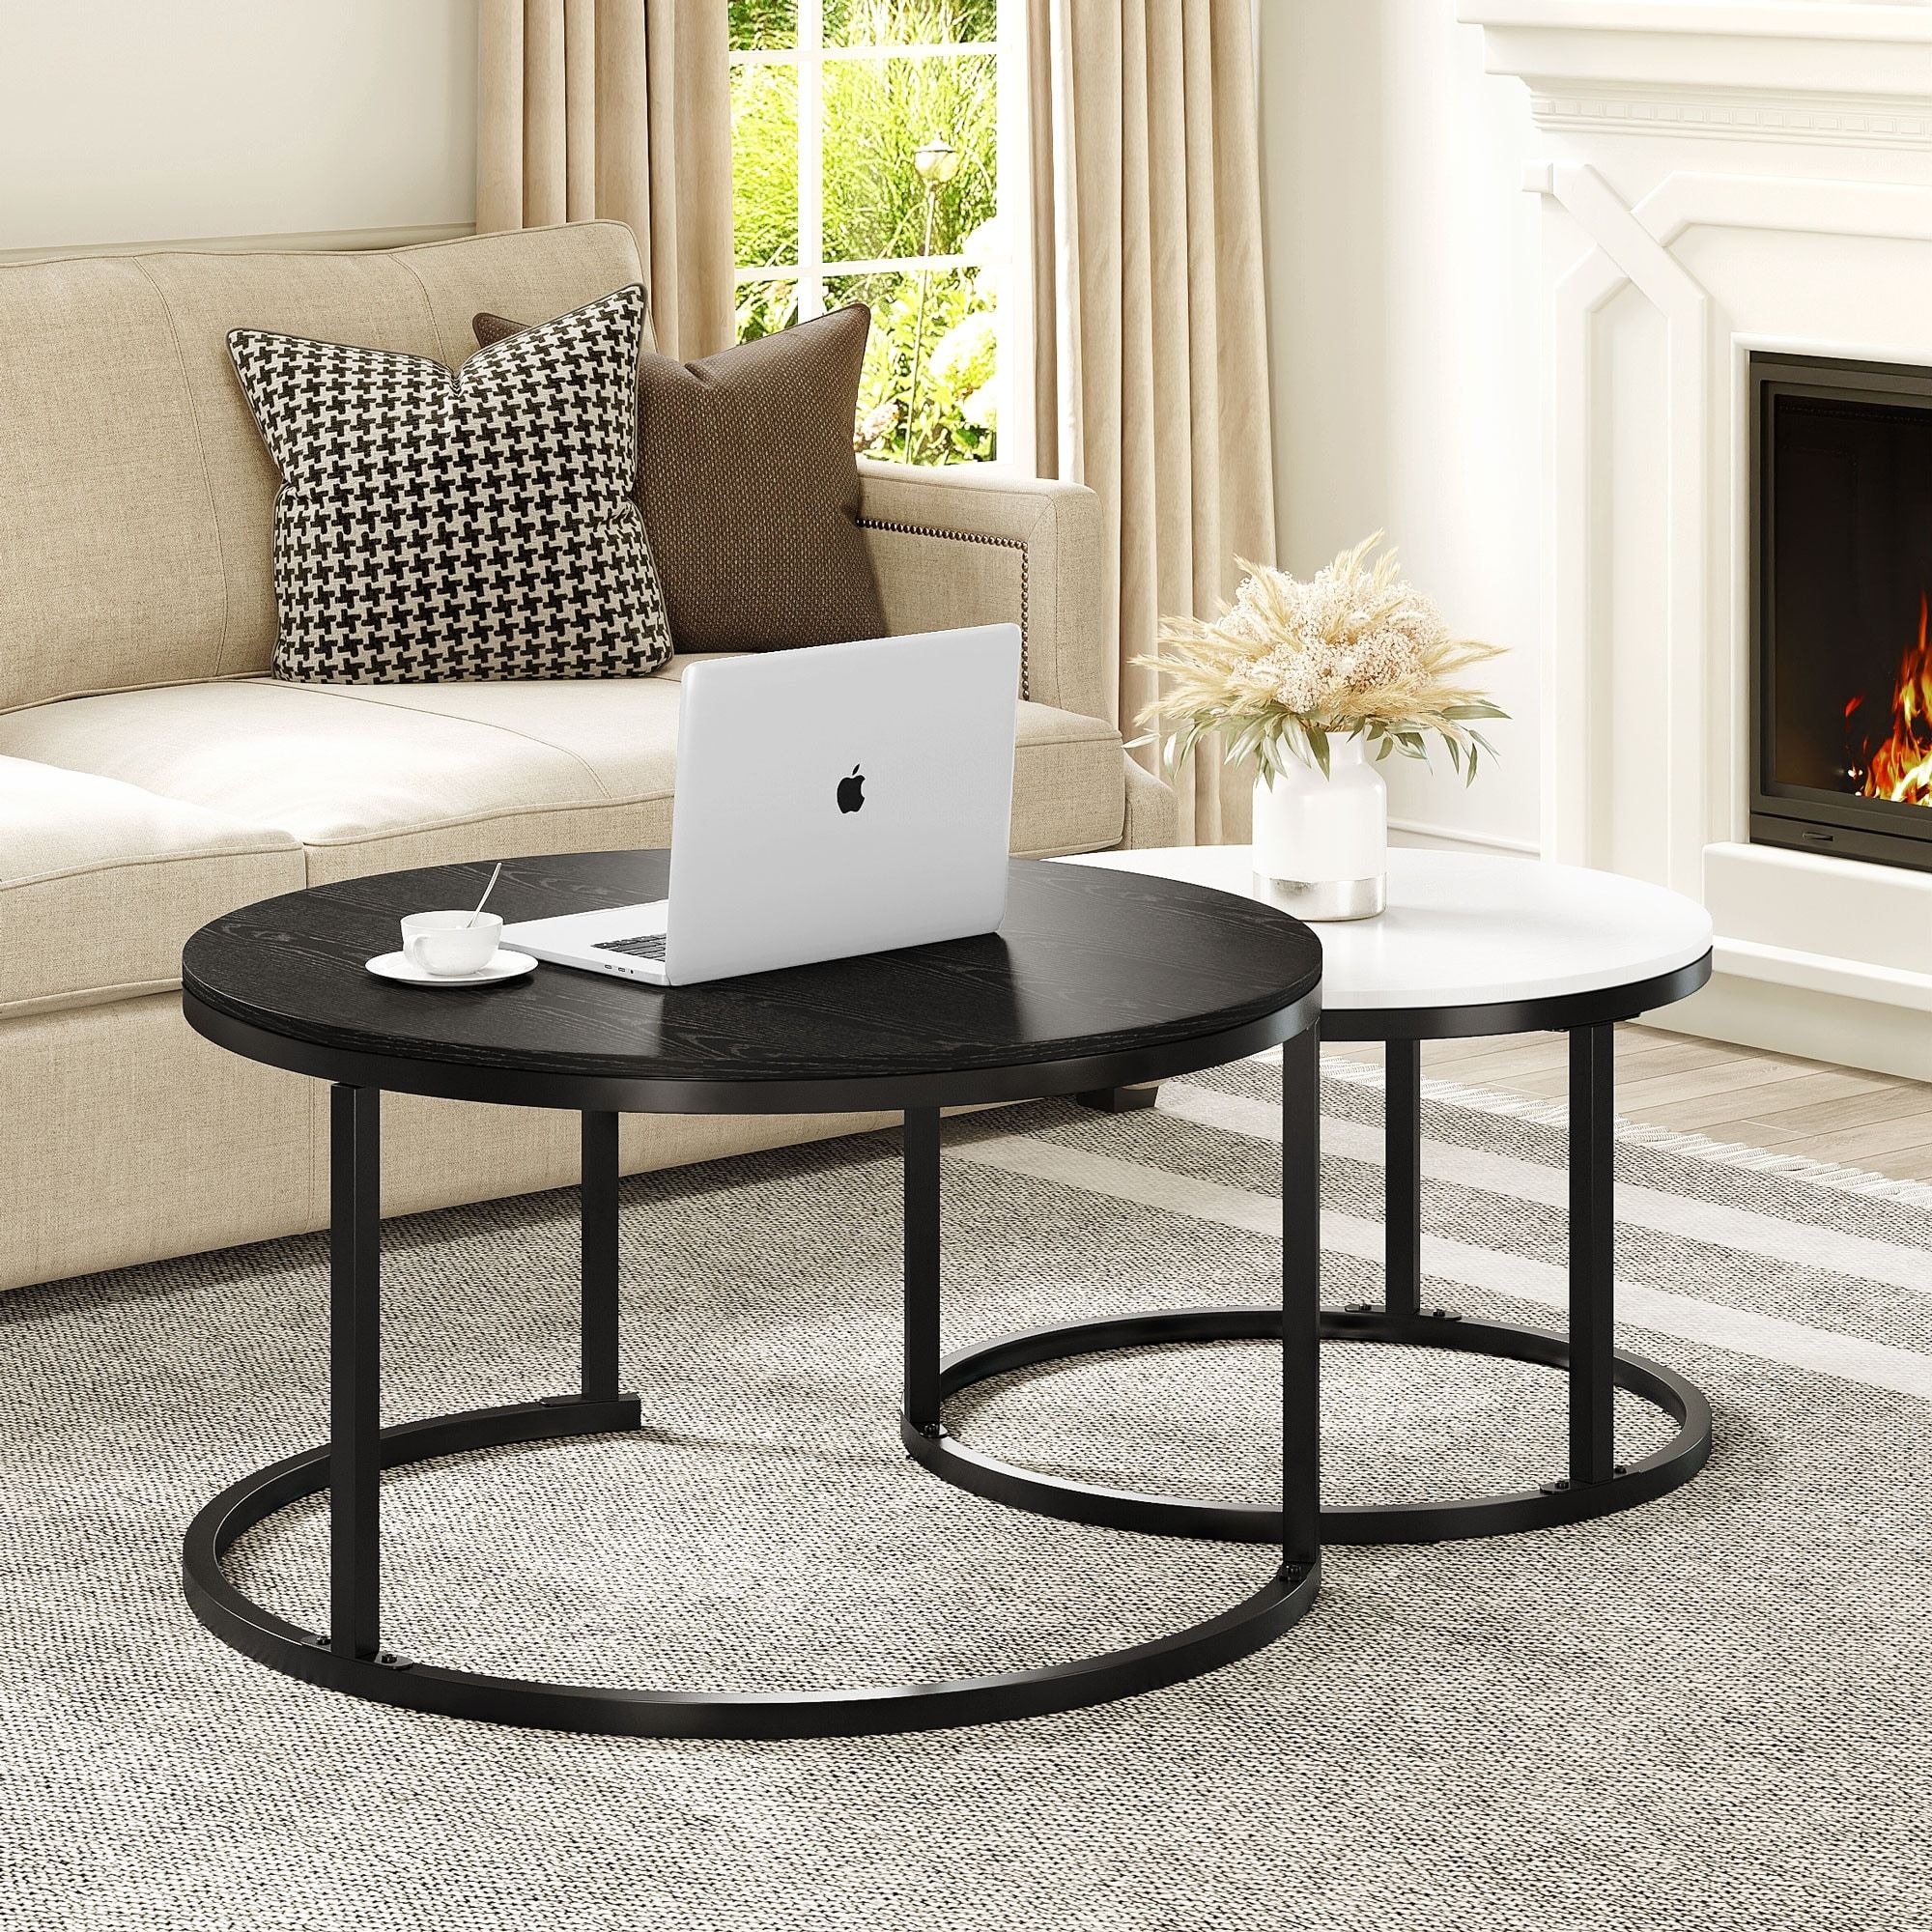 Modern Nesting Round Coffee Table Set Of 2 For Living Room Black And White  – On Sale – Bed Bath & Beyond – 37364175 With Regard To Modern Nesting Coffee Tables (Photo 4 of 15)